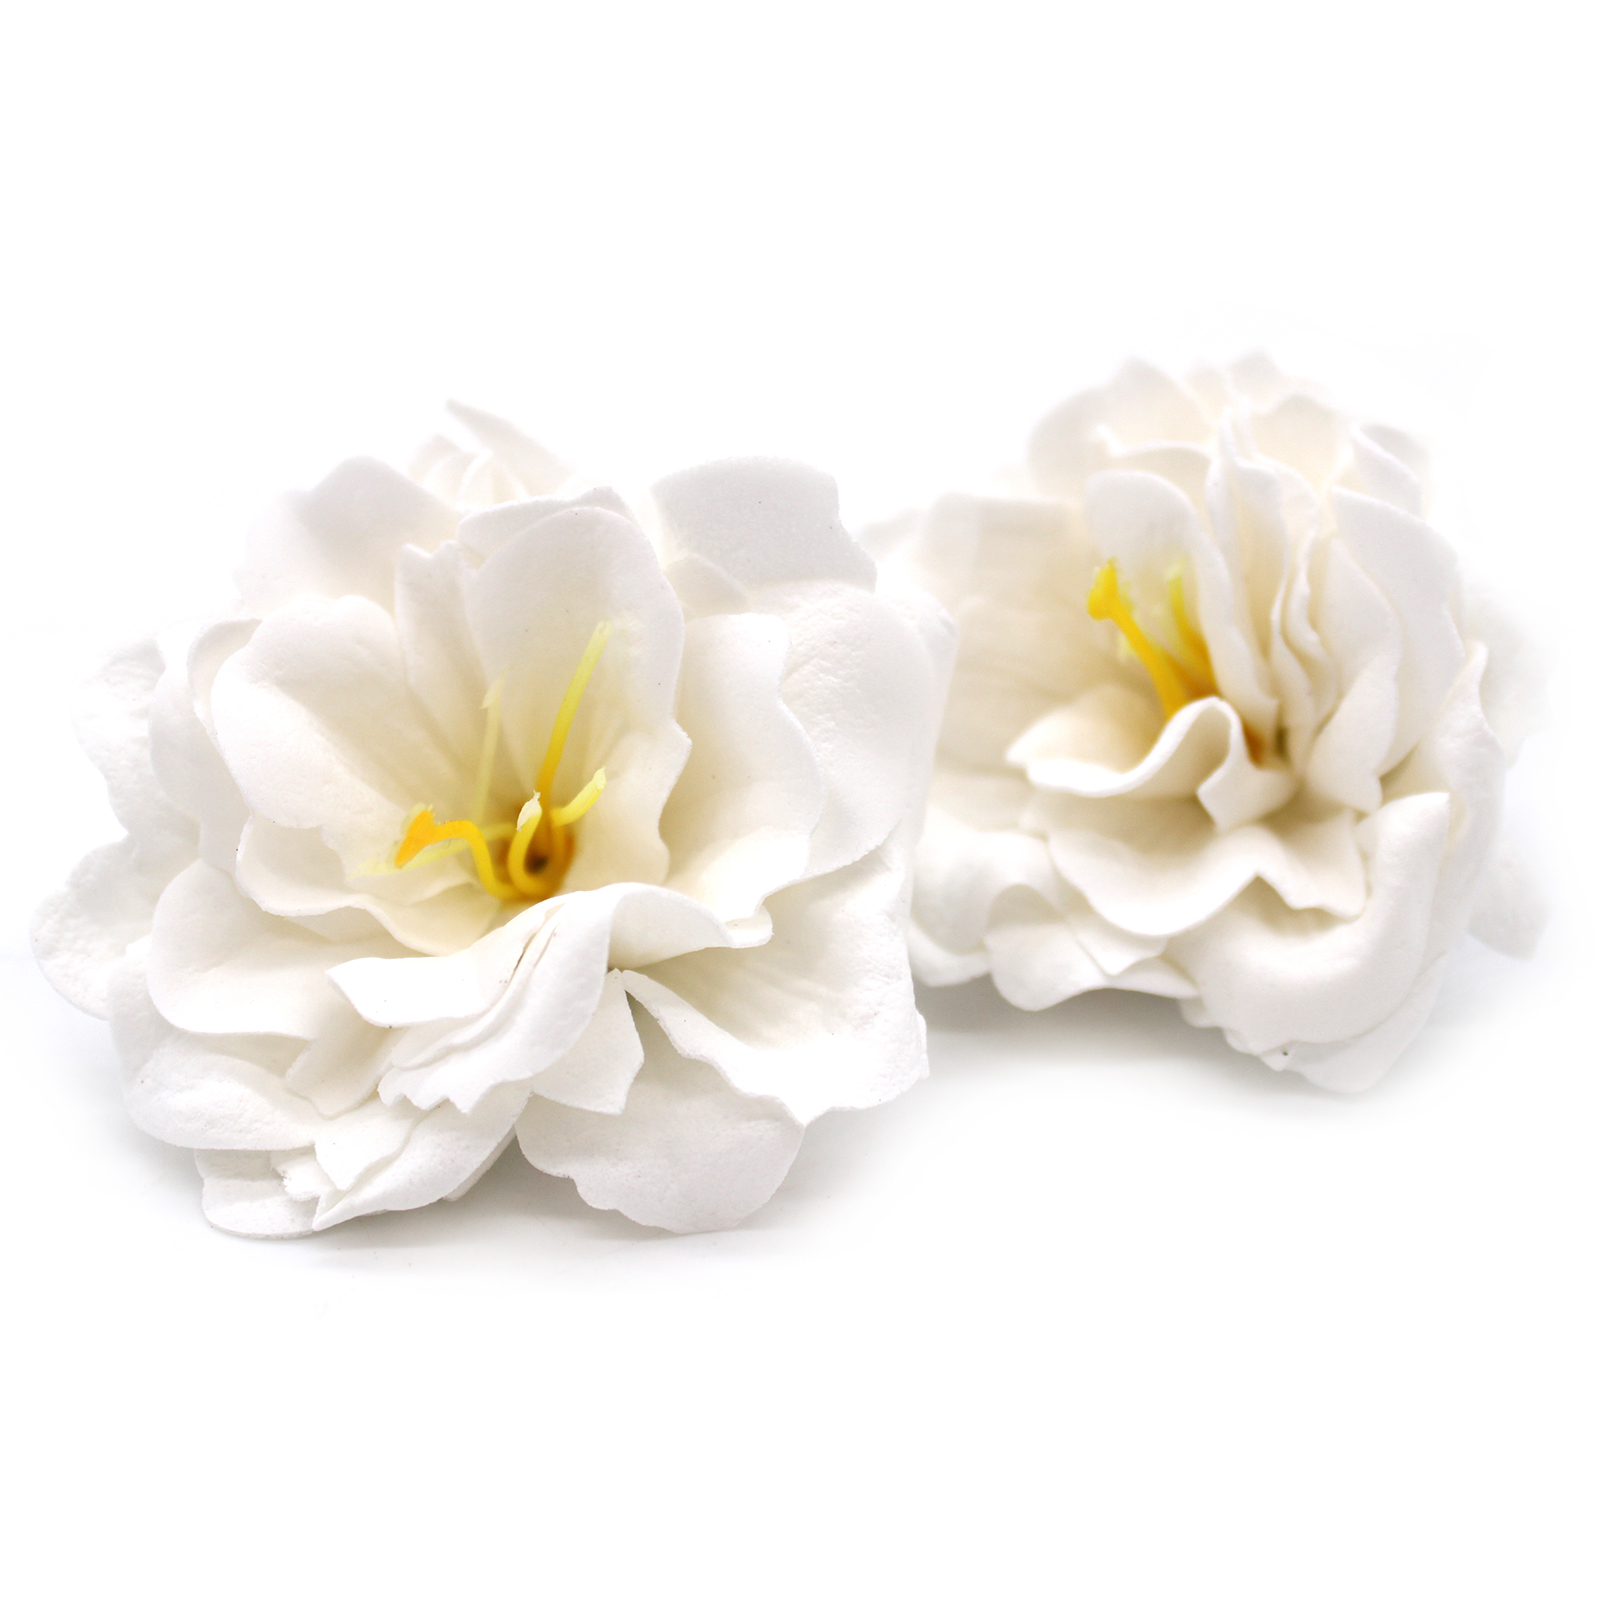 10 x Craft Soap Flowers - Small Peony - White